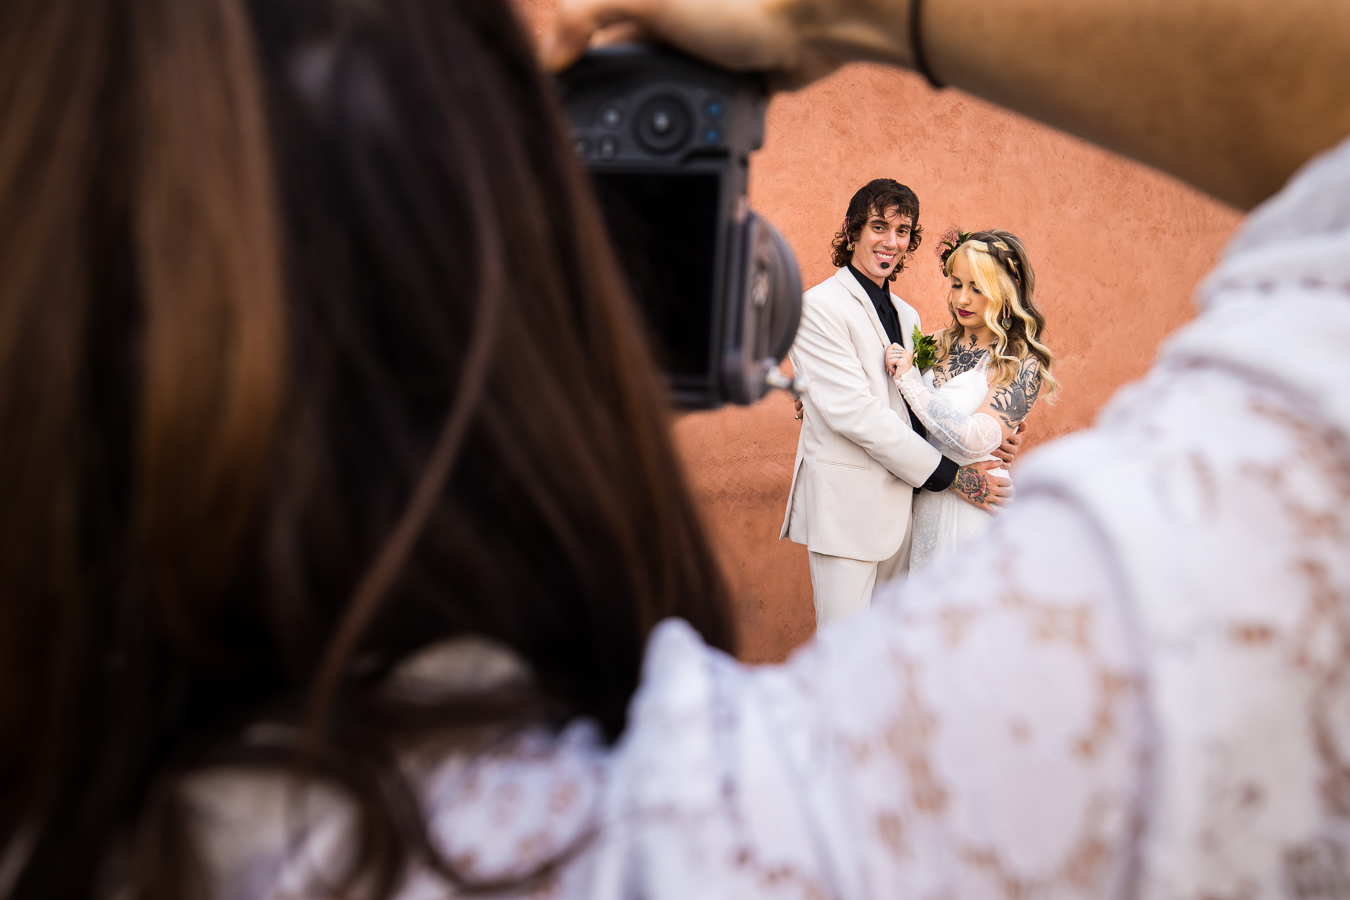 behind the scenes image of lisa Rhinehart capturing the bride and groom during their romantic portrait session outside of the hotel 